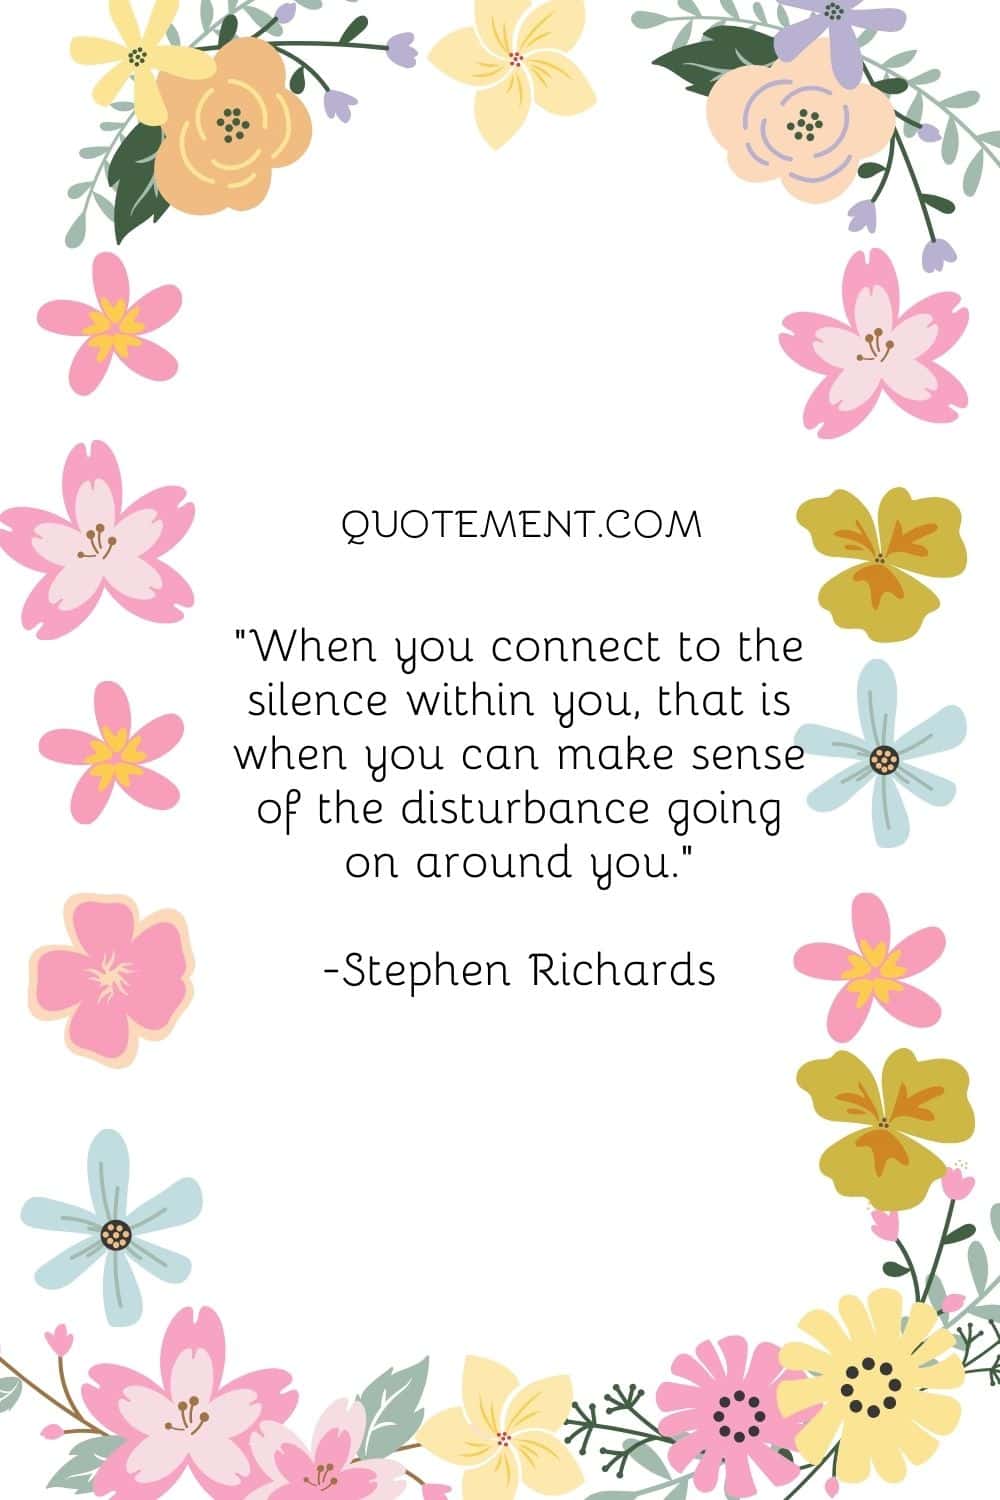 When you connect to the silence within you, that is when you can make sense of the disturbance going on around you.